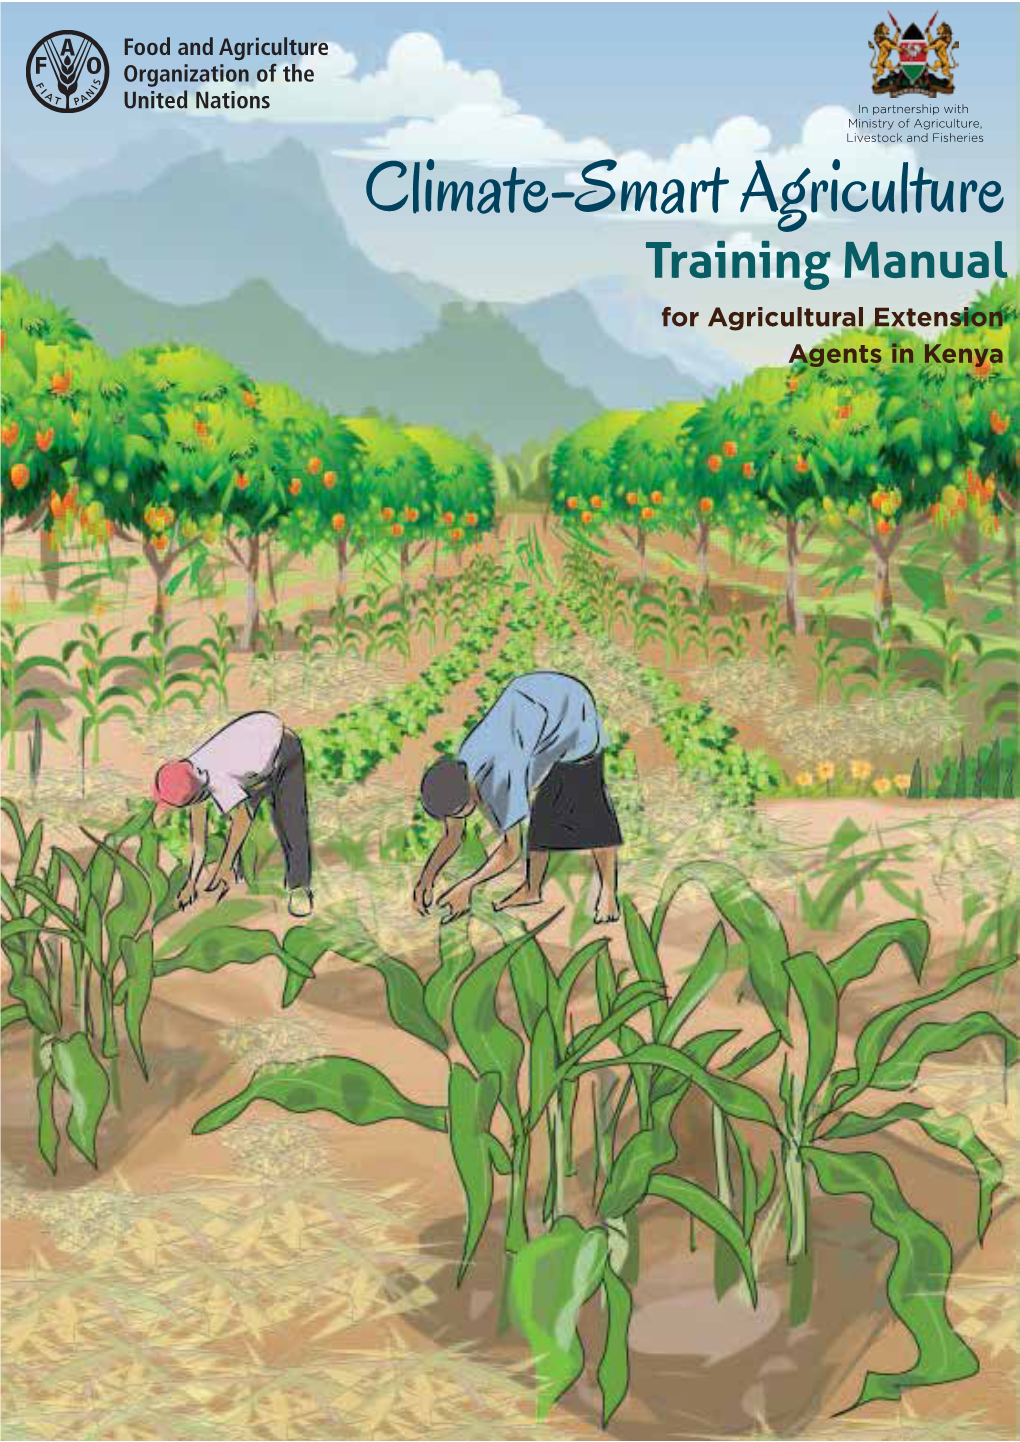 Climate-Smart Agriculture Training Manual for Agricultural Extension Agents in Kenya